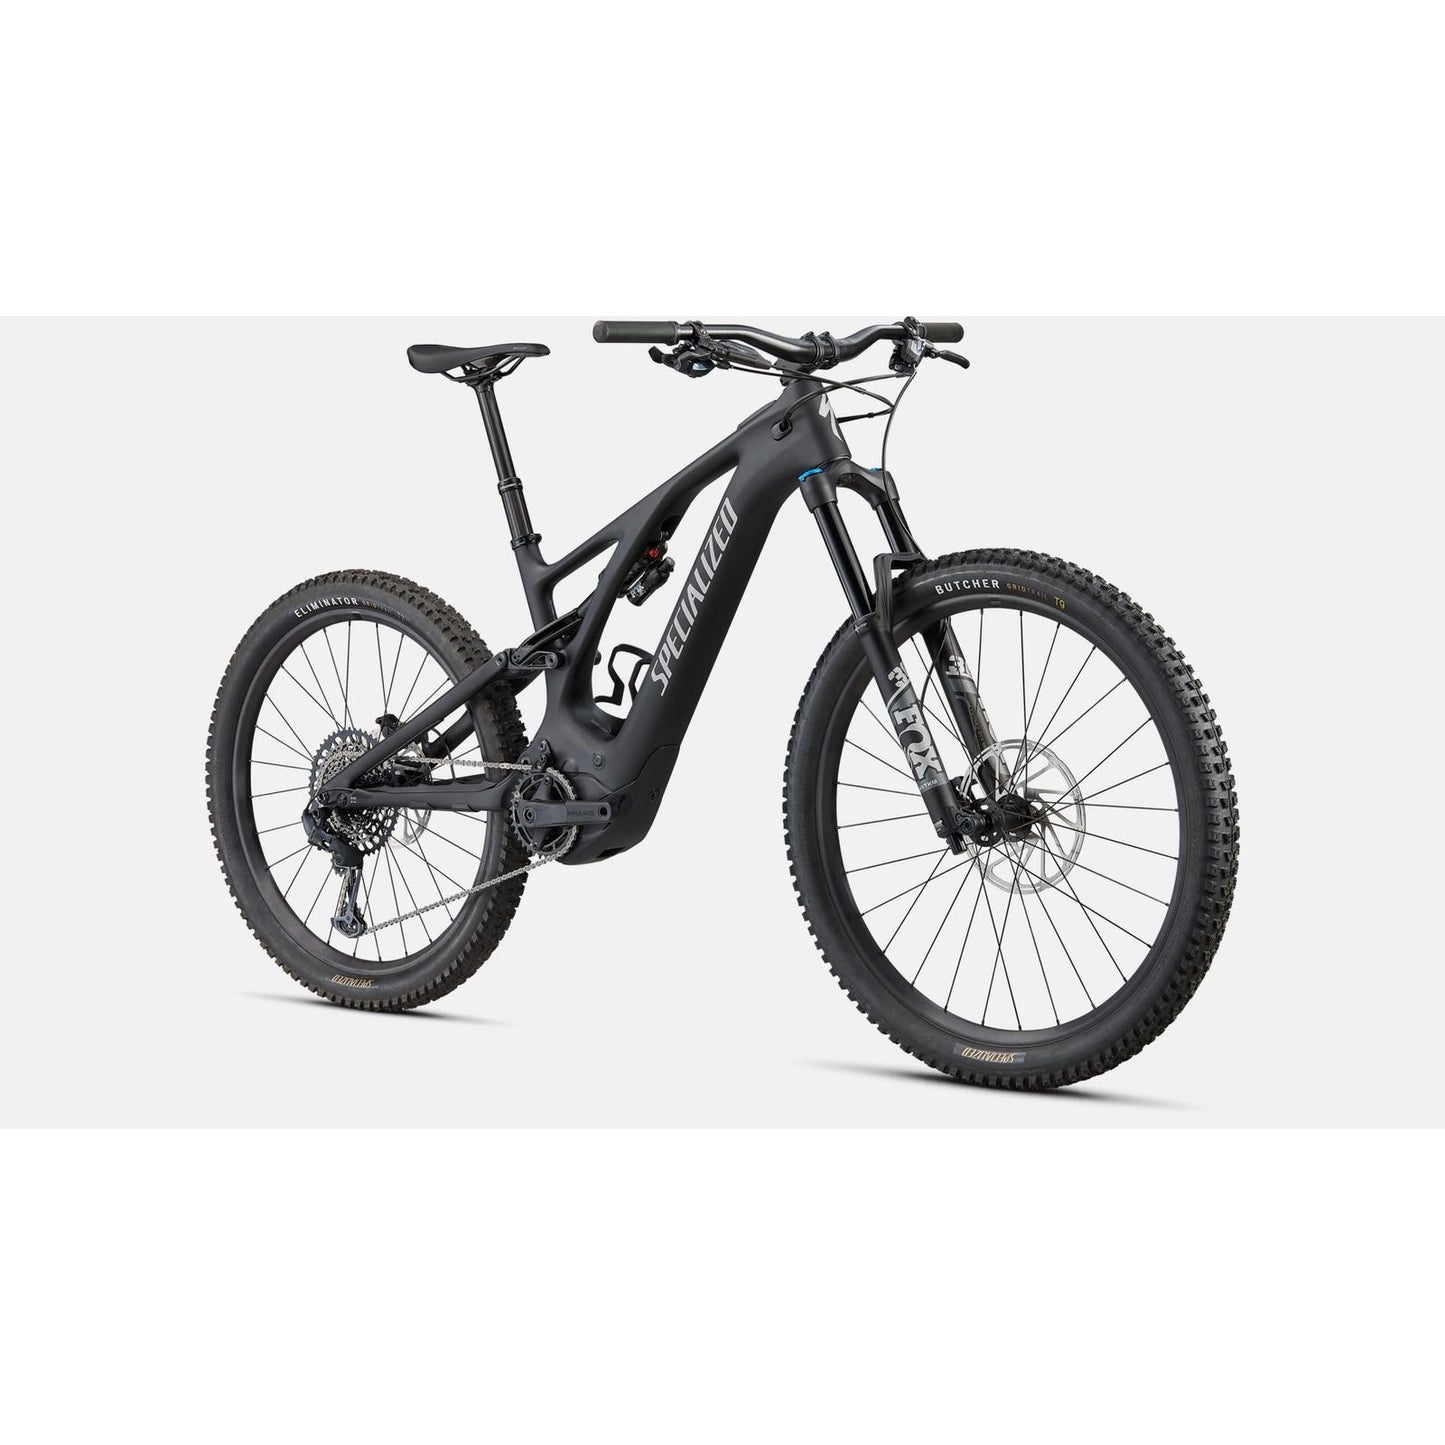 Specialized Turbo Levo Comp Carbon Electric Mountain Bike - Bikes - Bicycle Warehouse